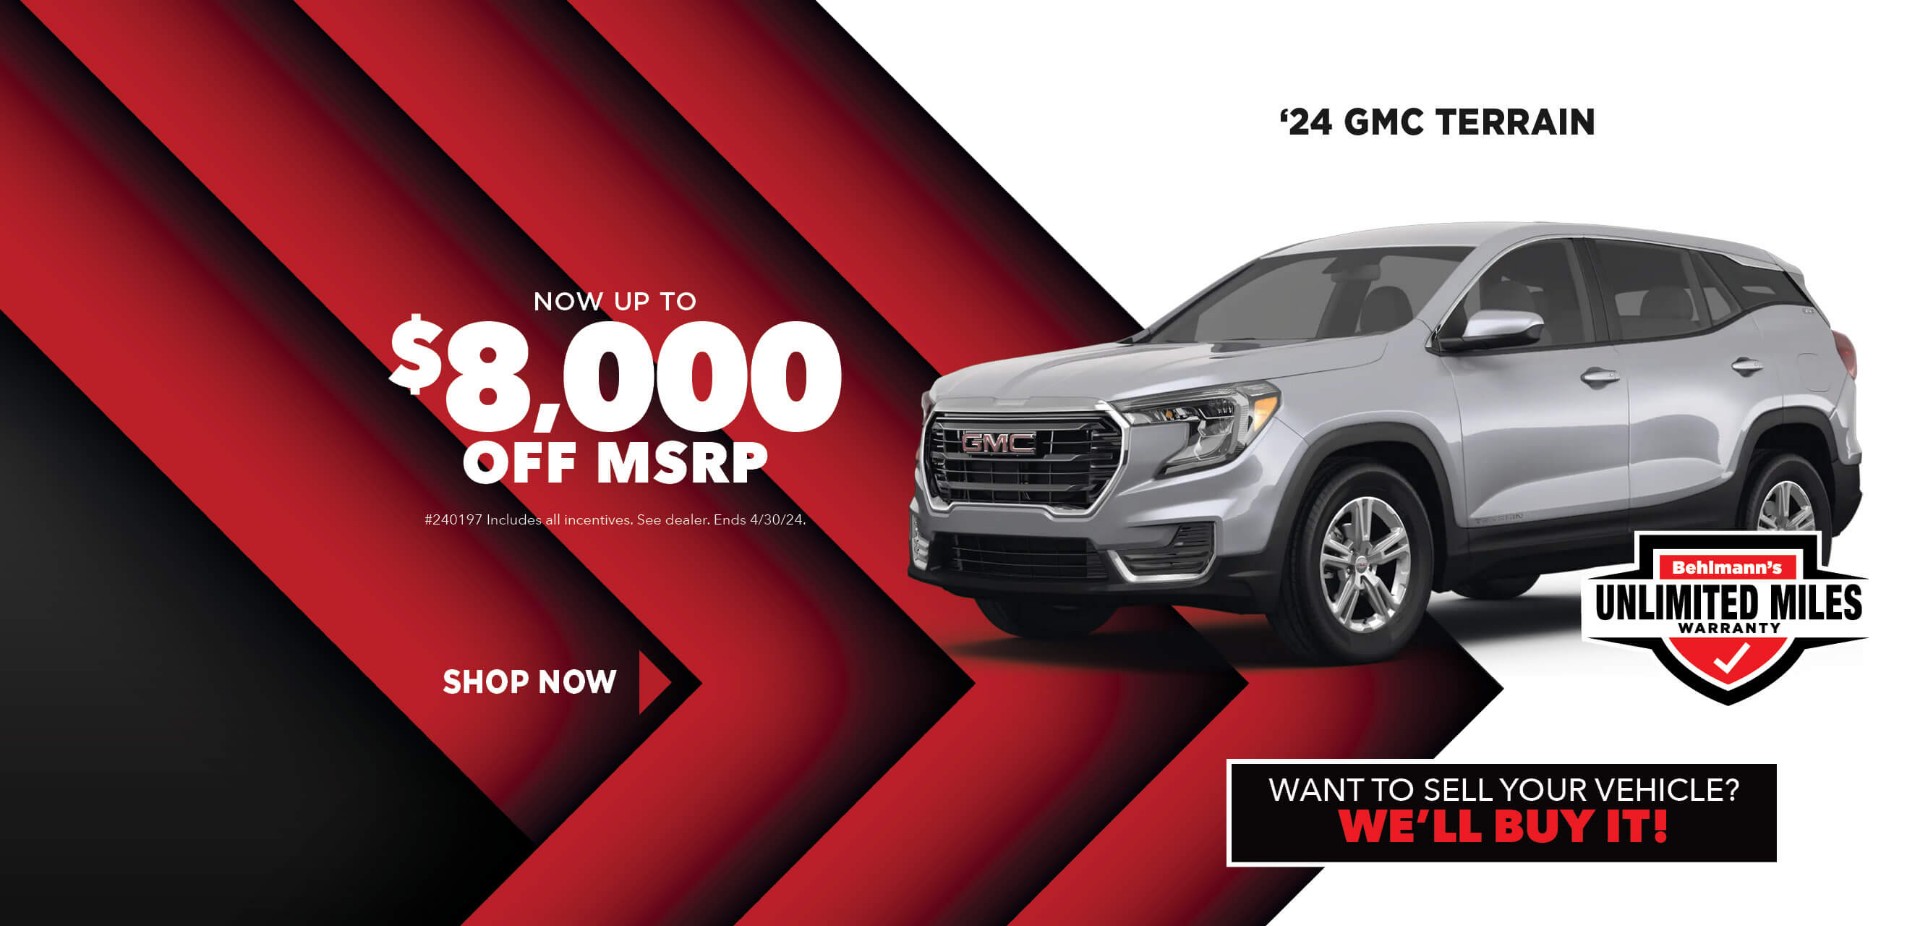 Gray SUV with advertising slogans: April Savings - Now up to $8,000 off MSRP on 2024 GMC Terrain.